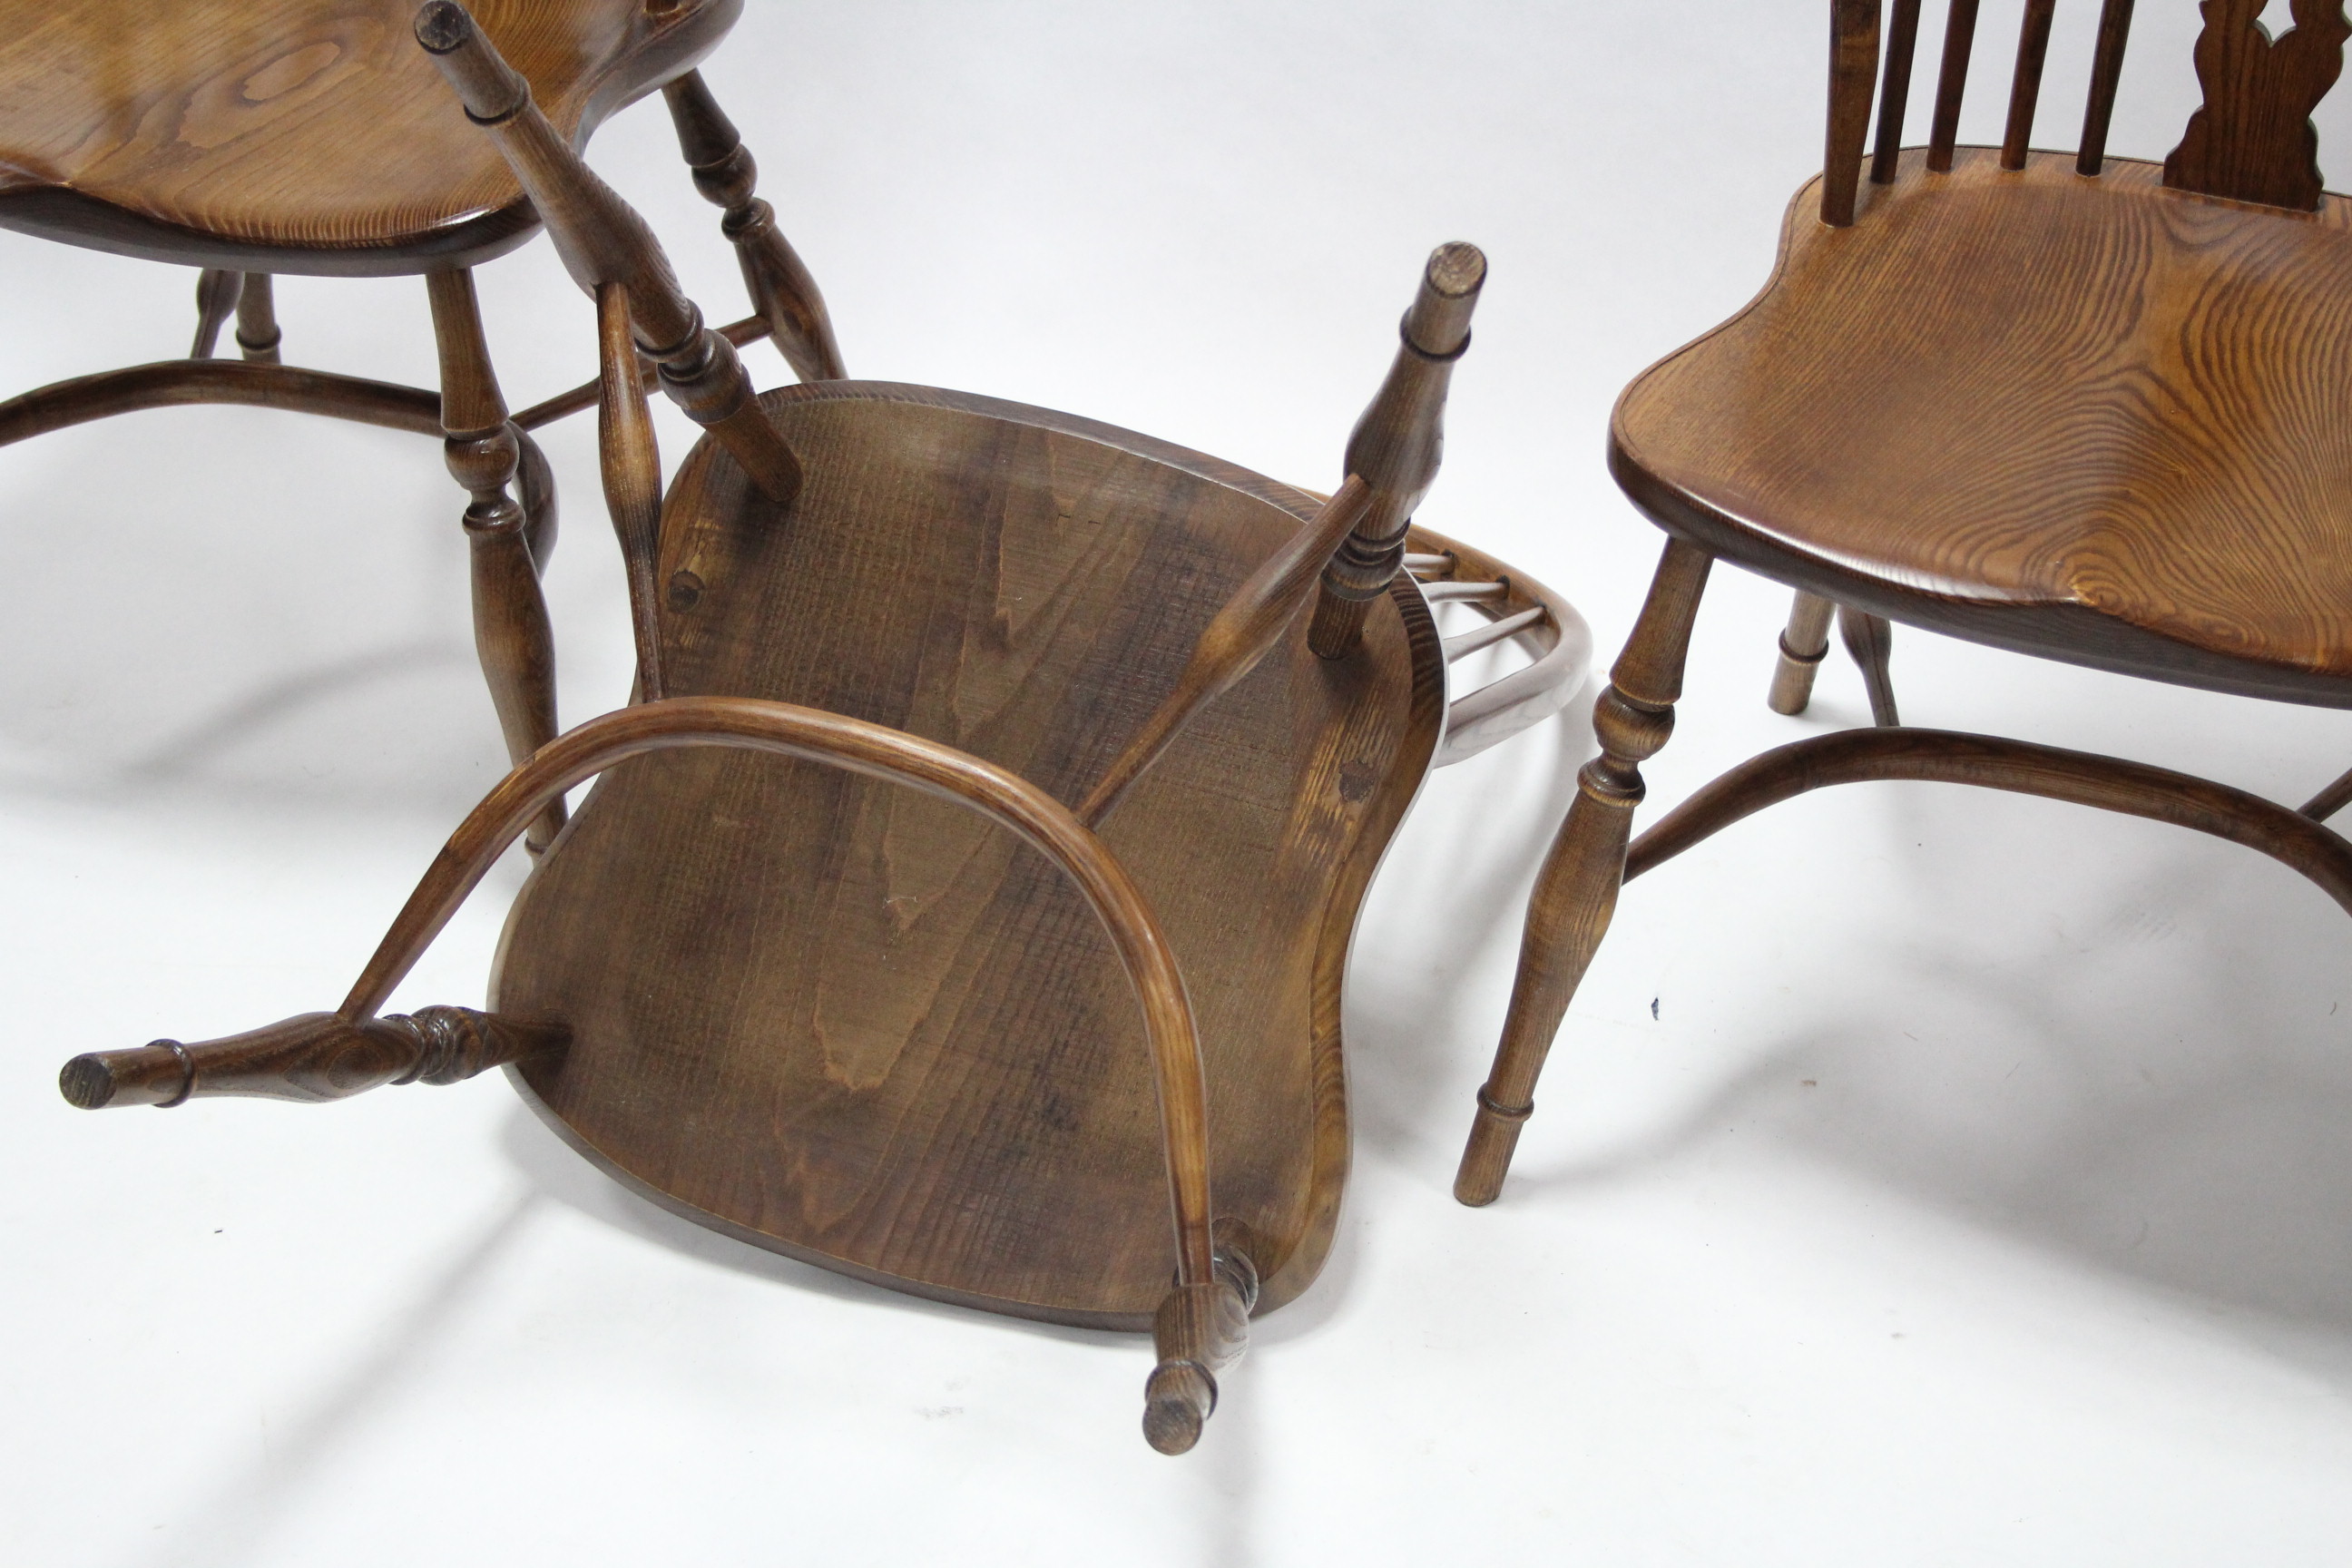 GOOD QUALITY SET OF SIX 19th CENTURY WINDSOR-STYLE DINING CHAIRS (including a pair of carvers), with - Image 7 of 7